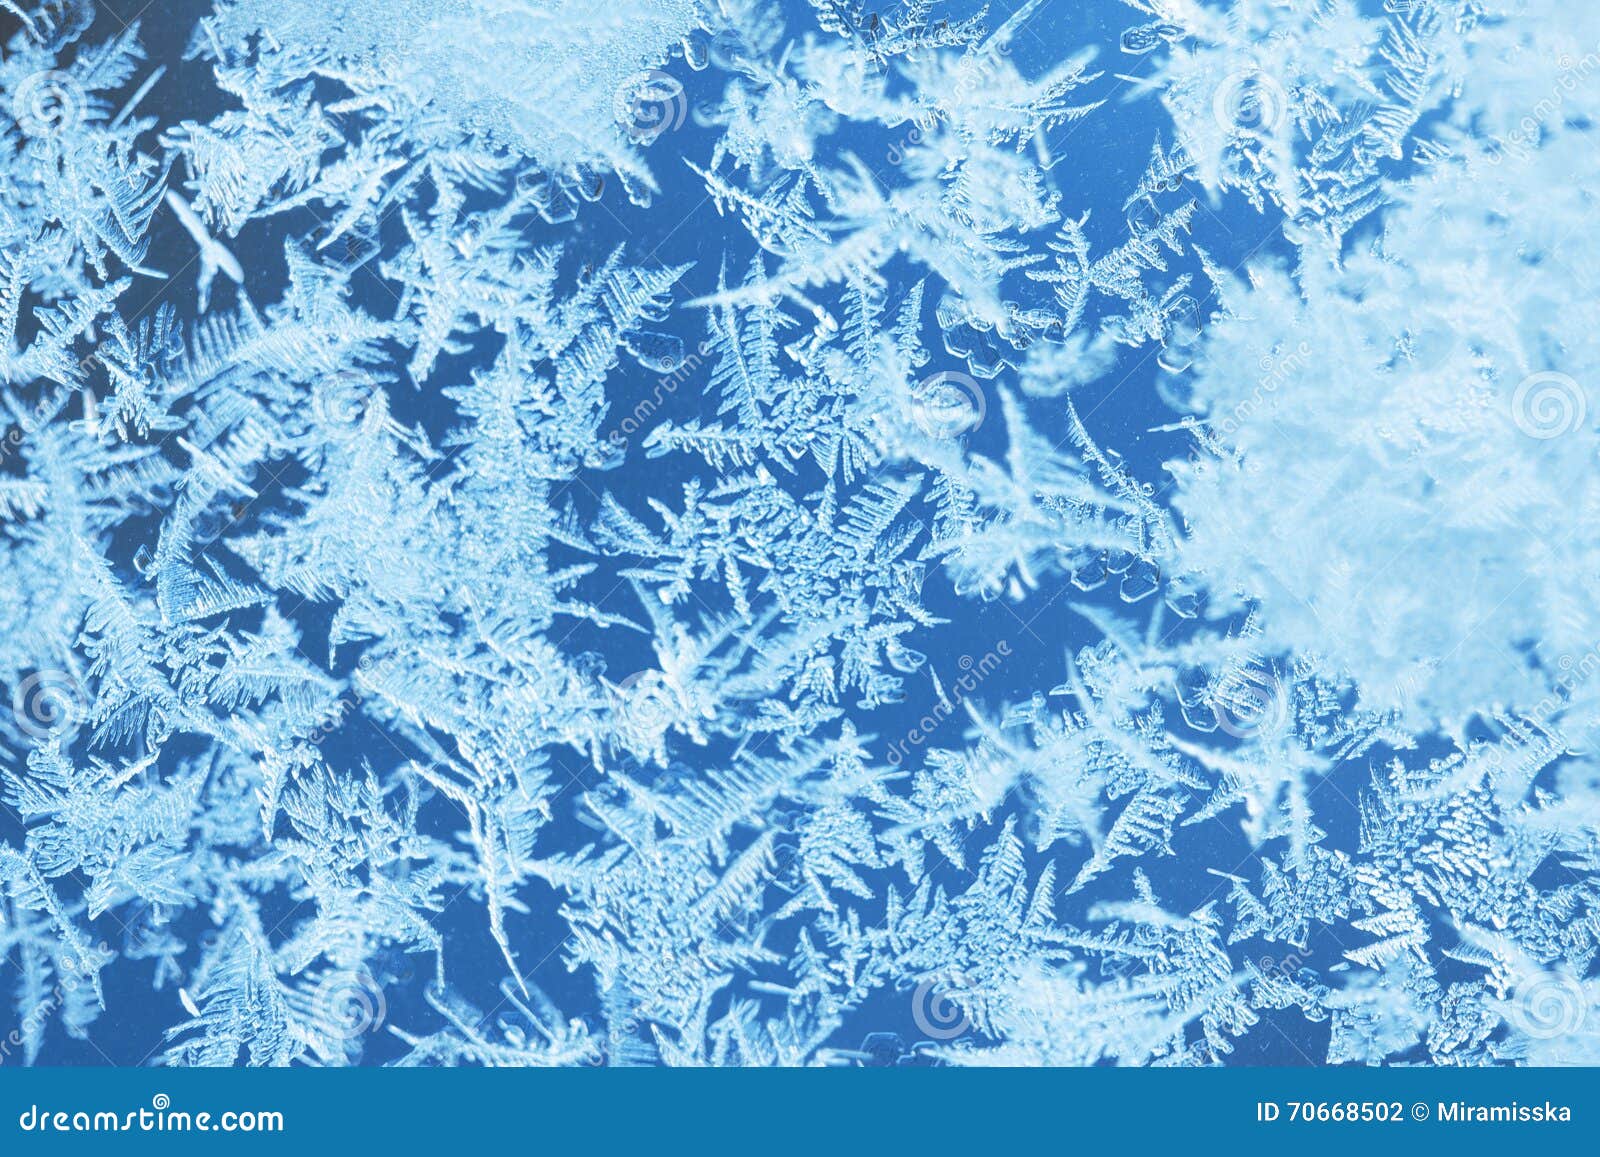 winter ice frost, frozen background. frosted window glass texture. cold cool icicles background. winter wonderland scene.